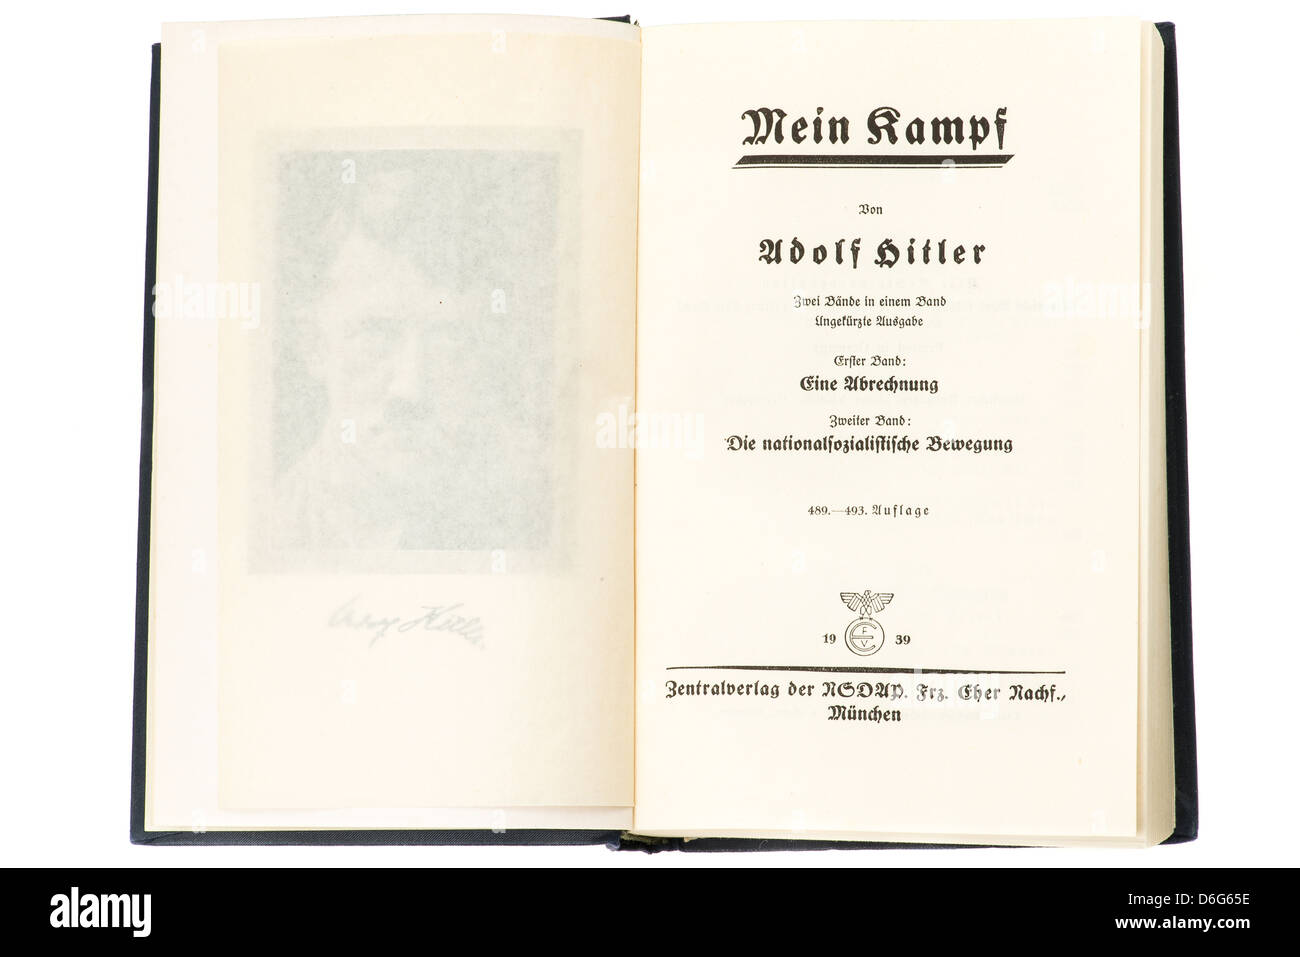 Inside pages of the hardback book Mein Kampf by Adolf Hitler, this is the 1939 edition. Studio shot with a white background. Stock Photo